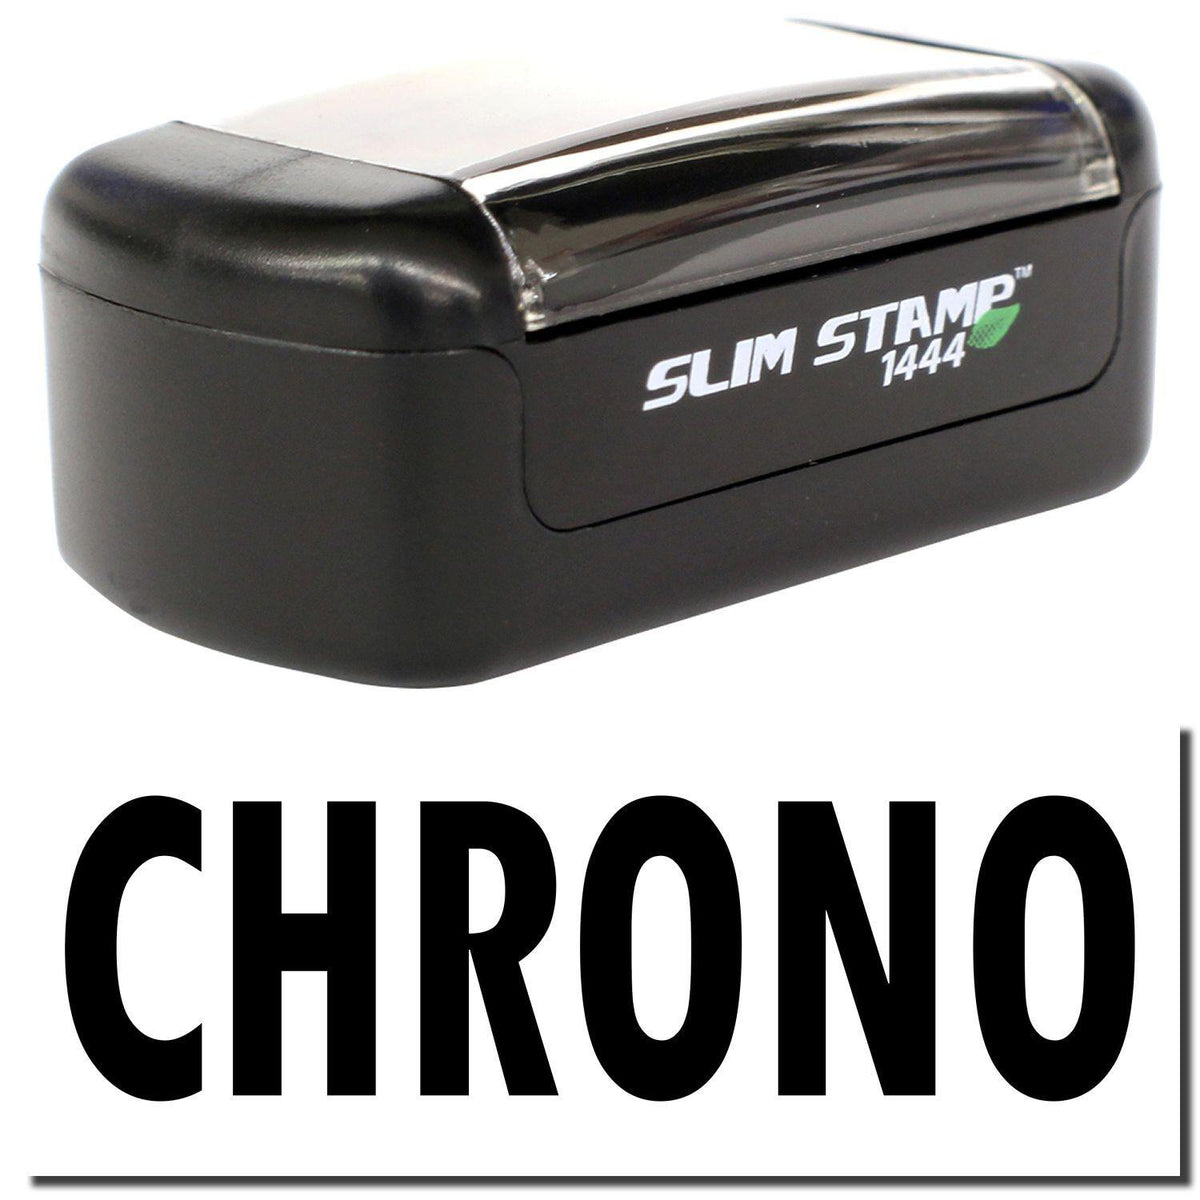 A stock office pre-inked stamp with a stamped image showing how the text &quot;CHRONO&quot; is displayed after stamping.